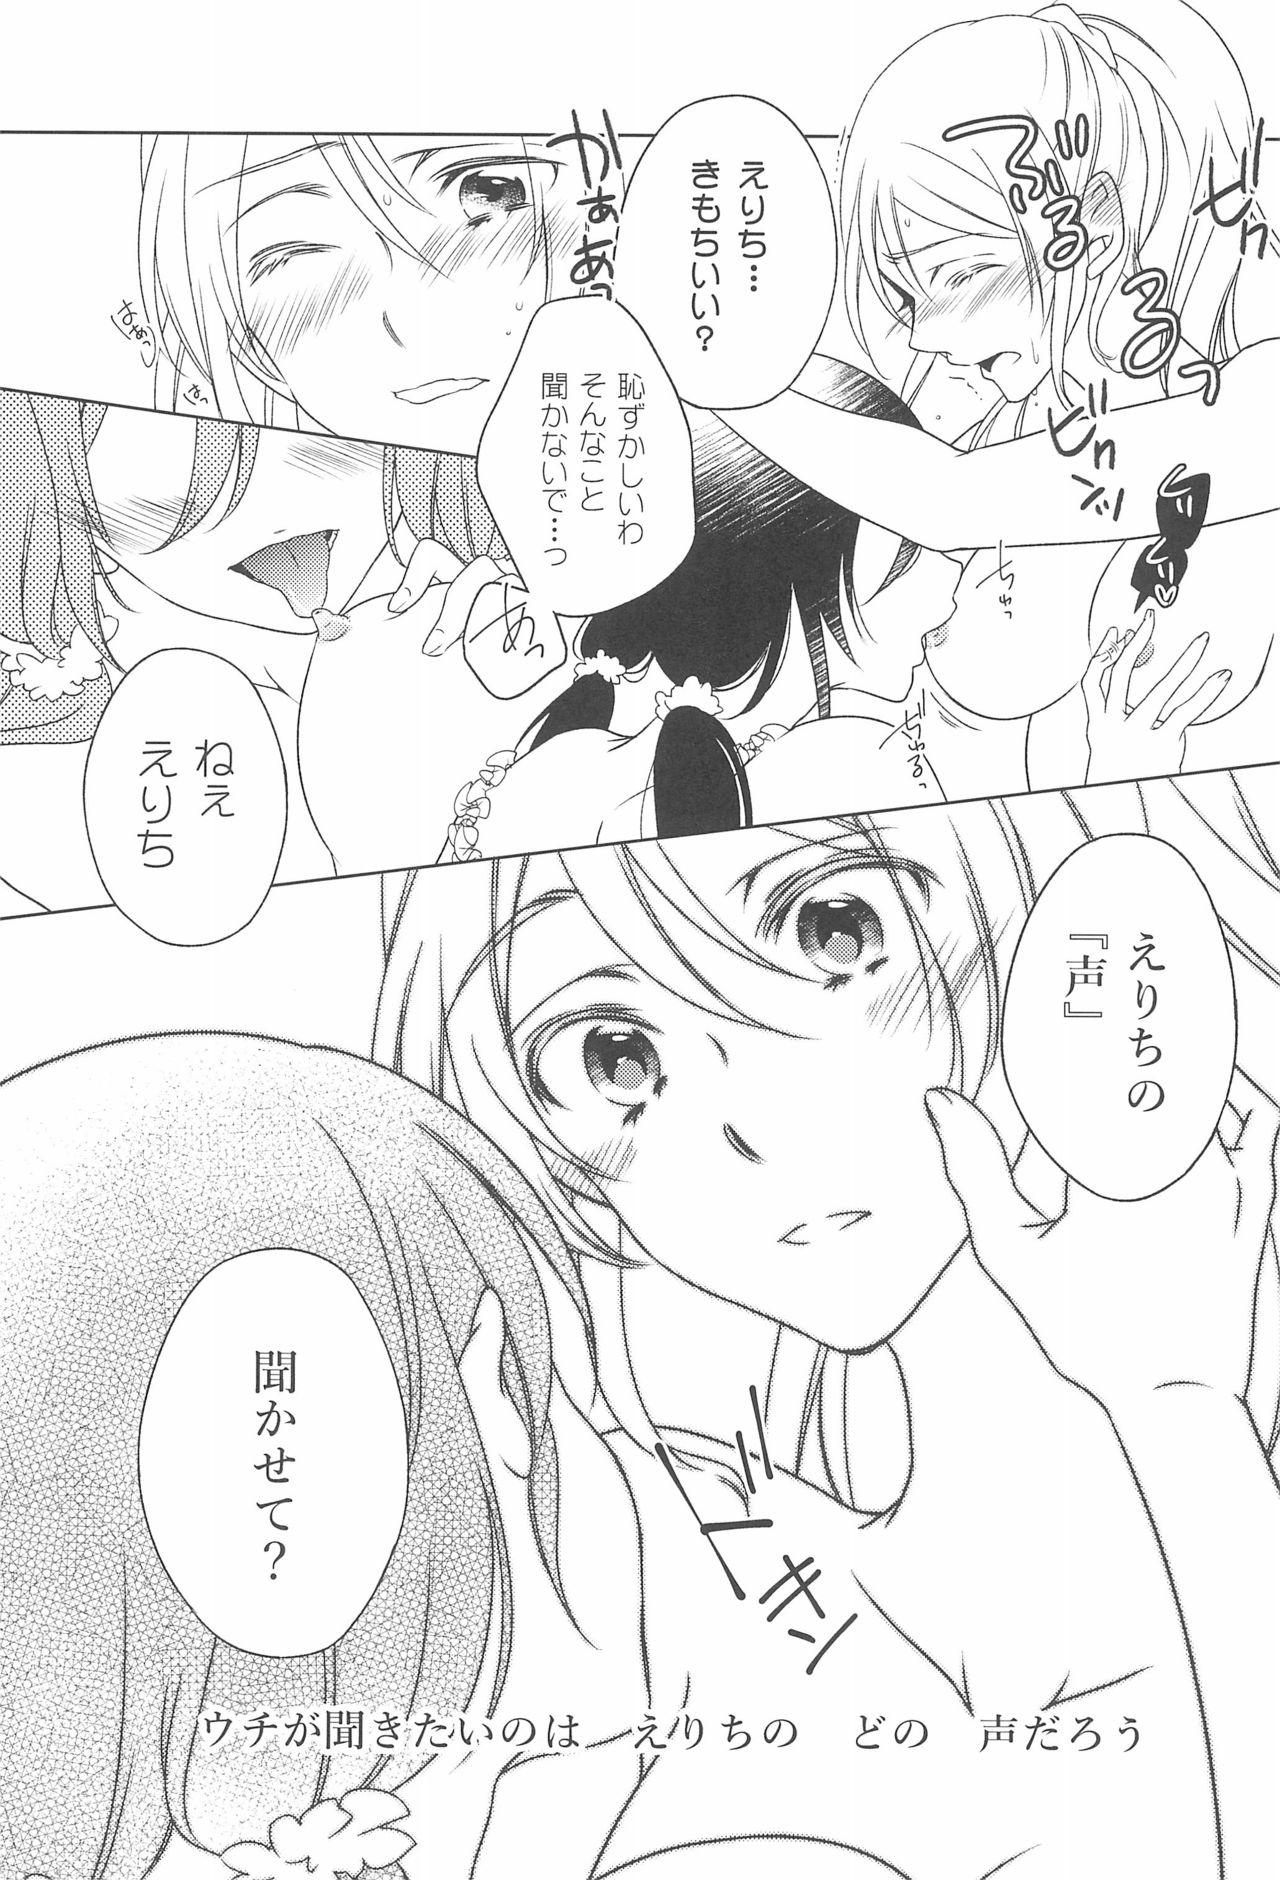 Ass To Mouth Kanojo wa. - Love live Long Hair - Page 11